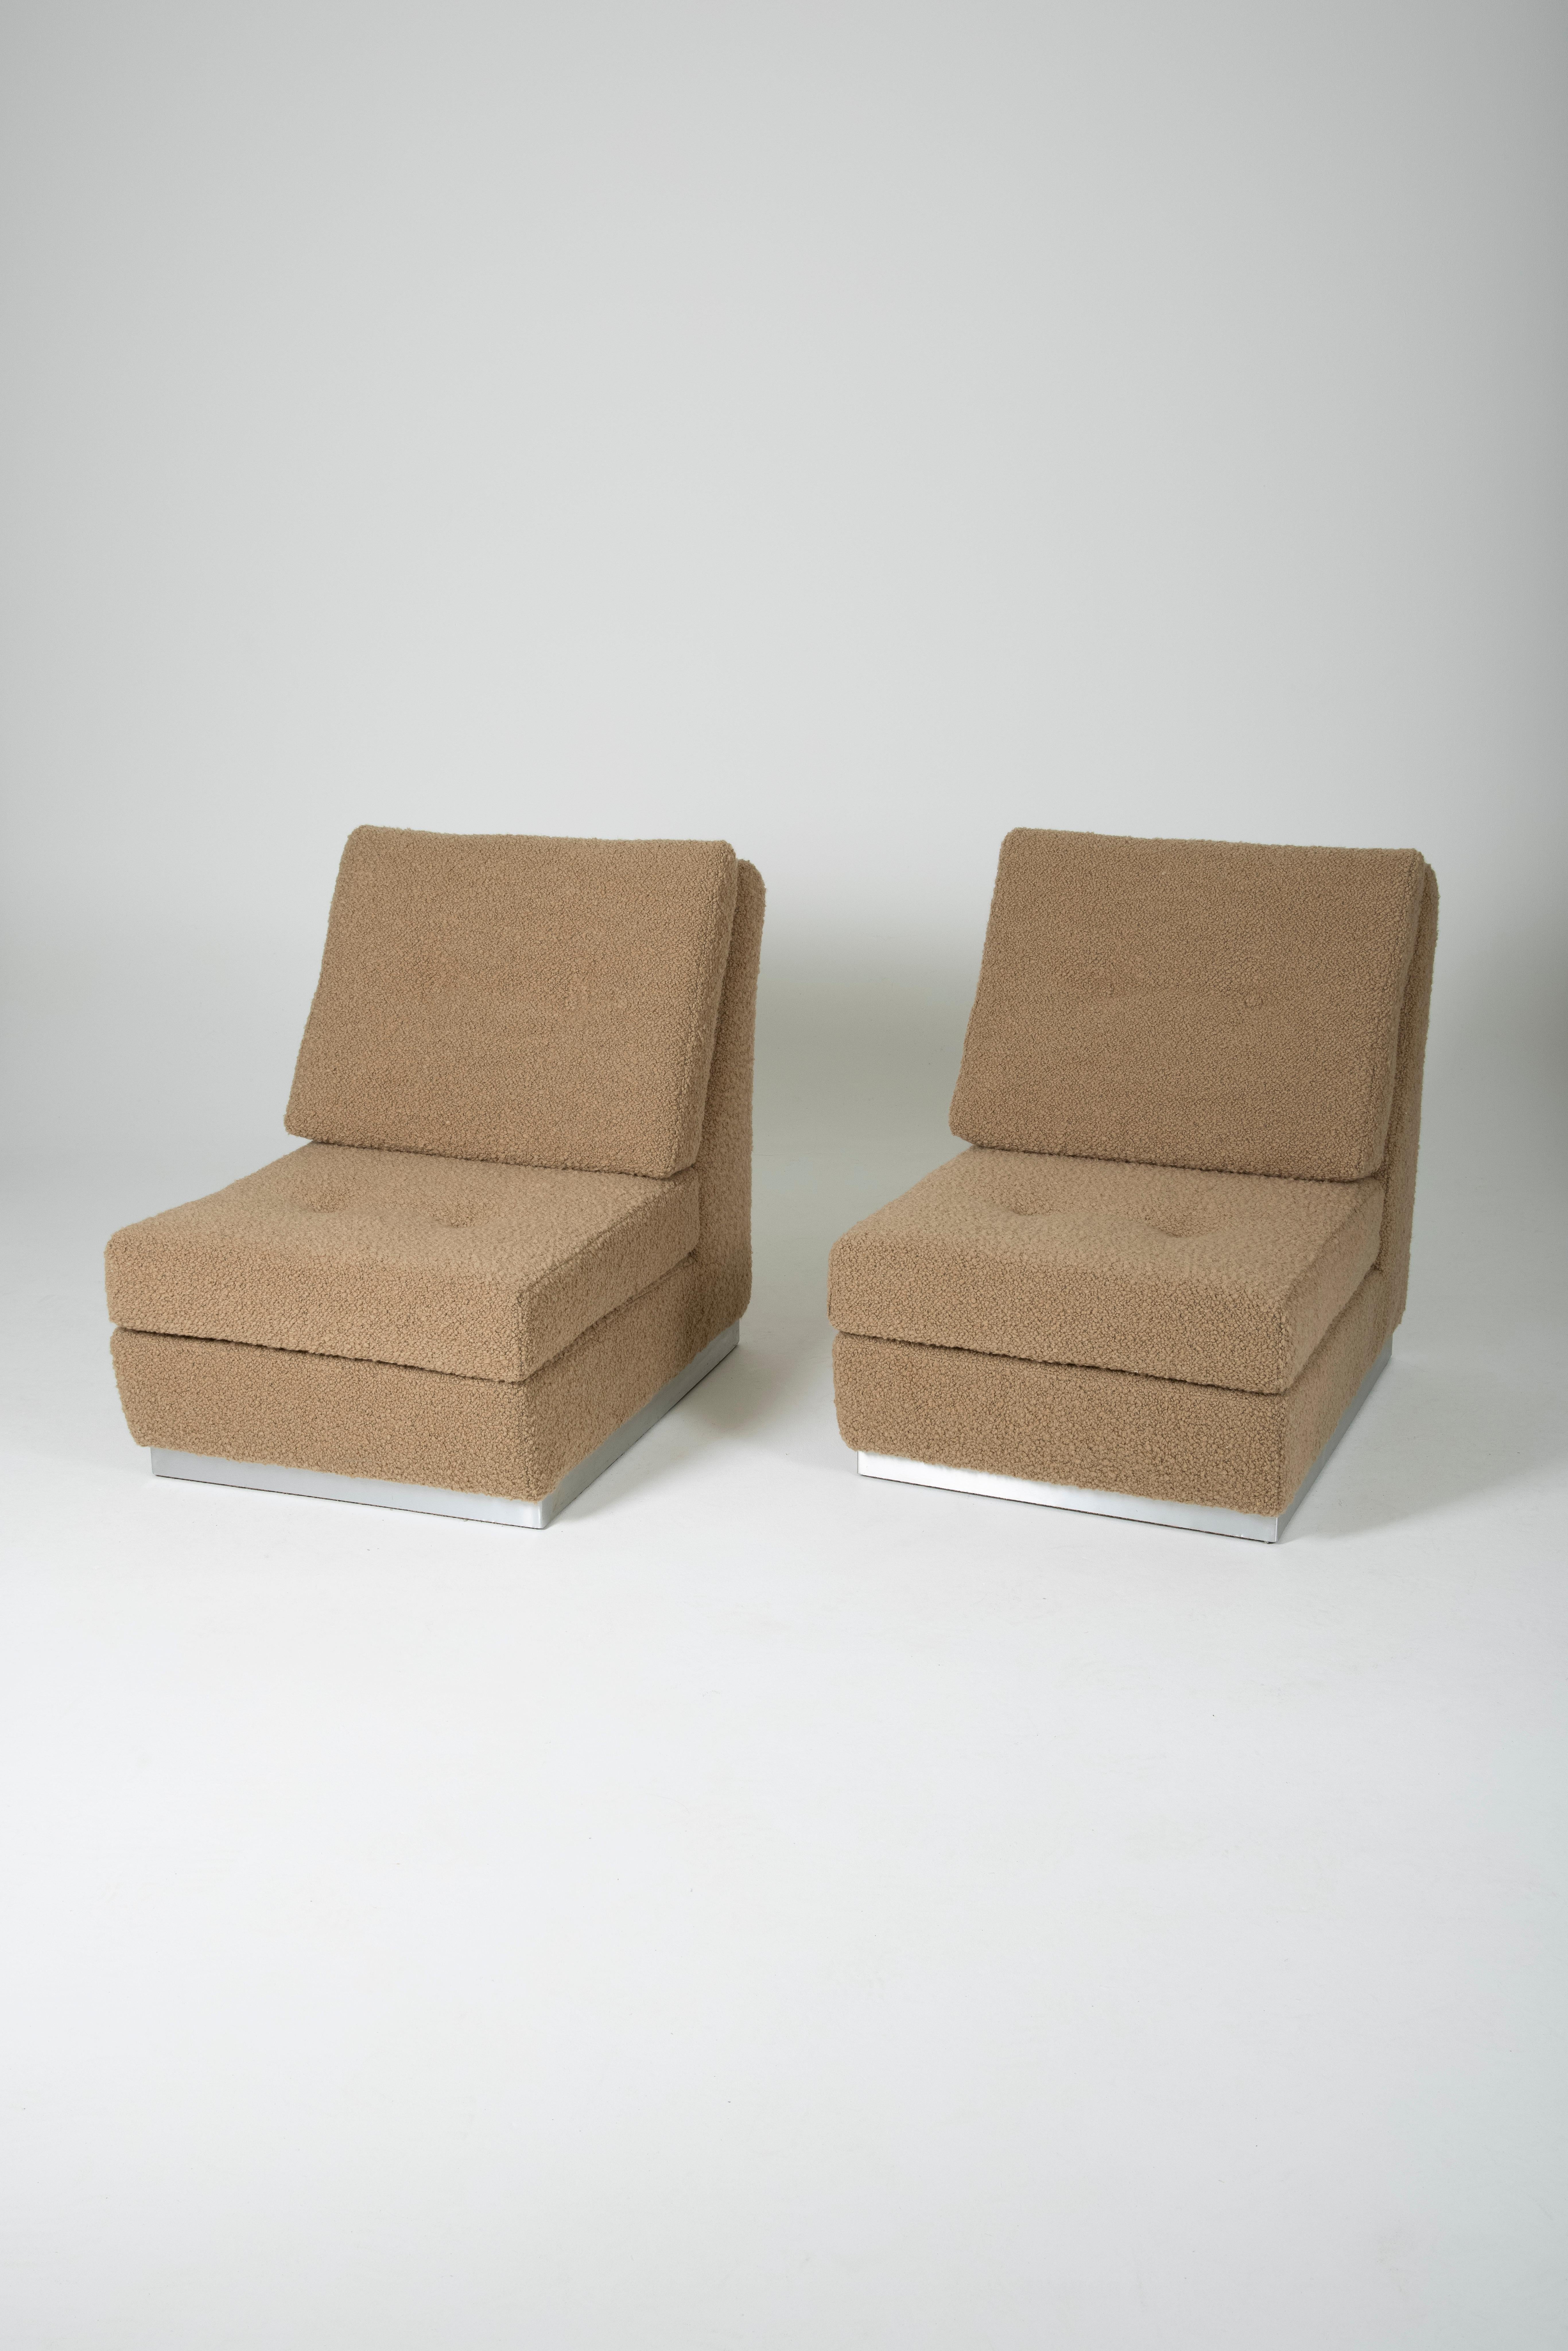 French Pair of Low Chairs Jacques Charpentier, 1970s